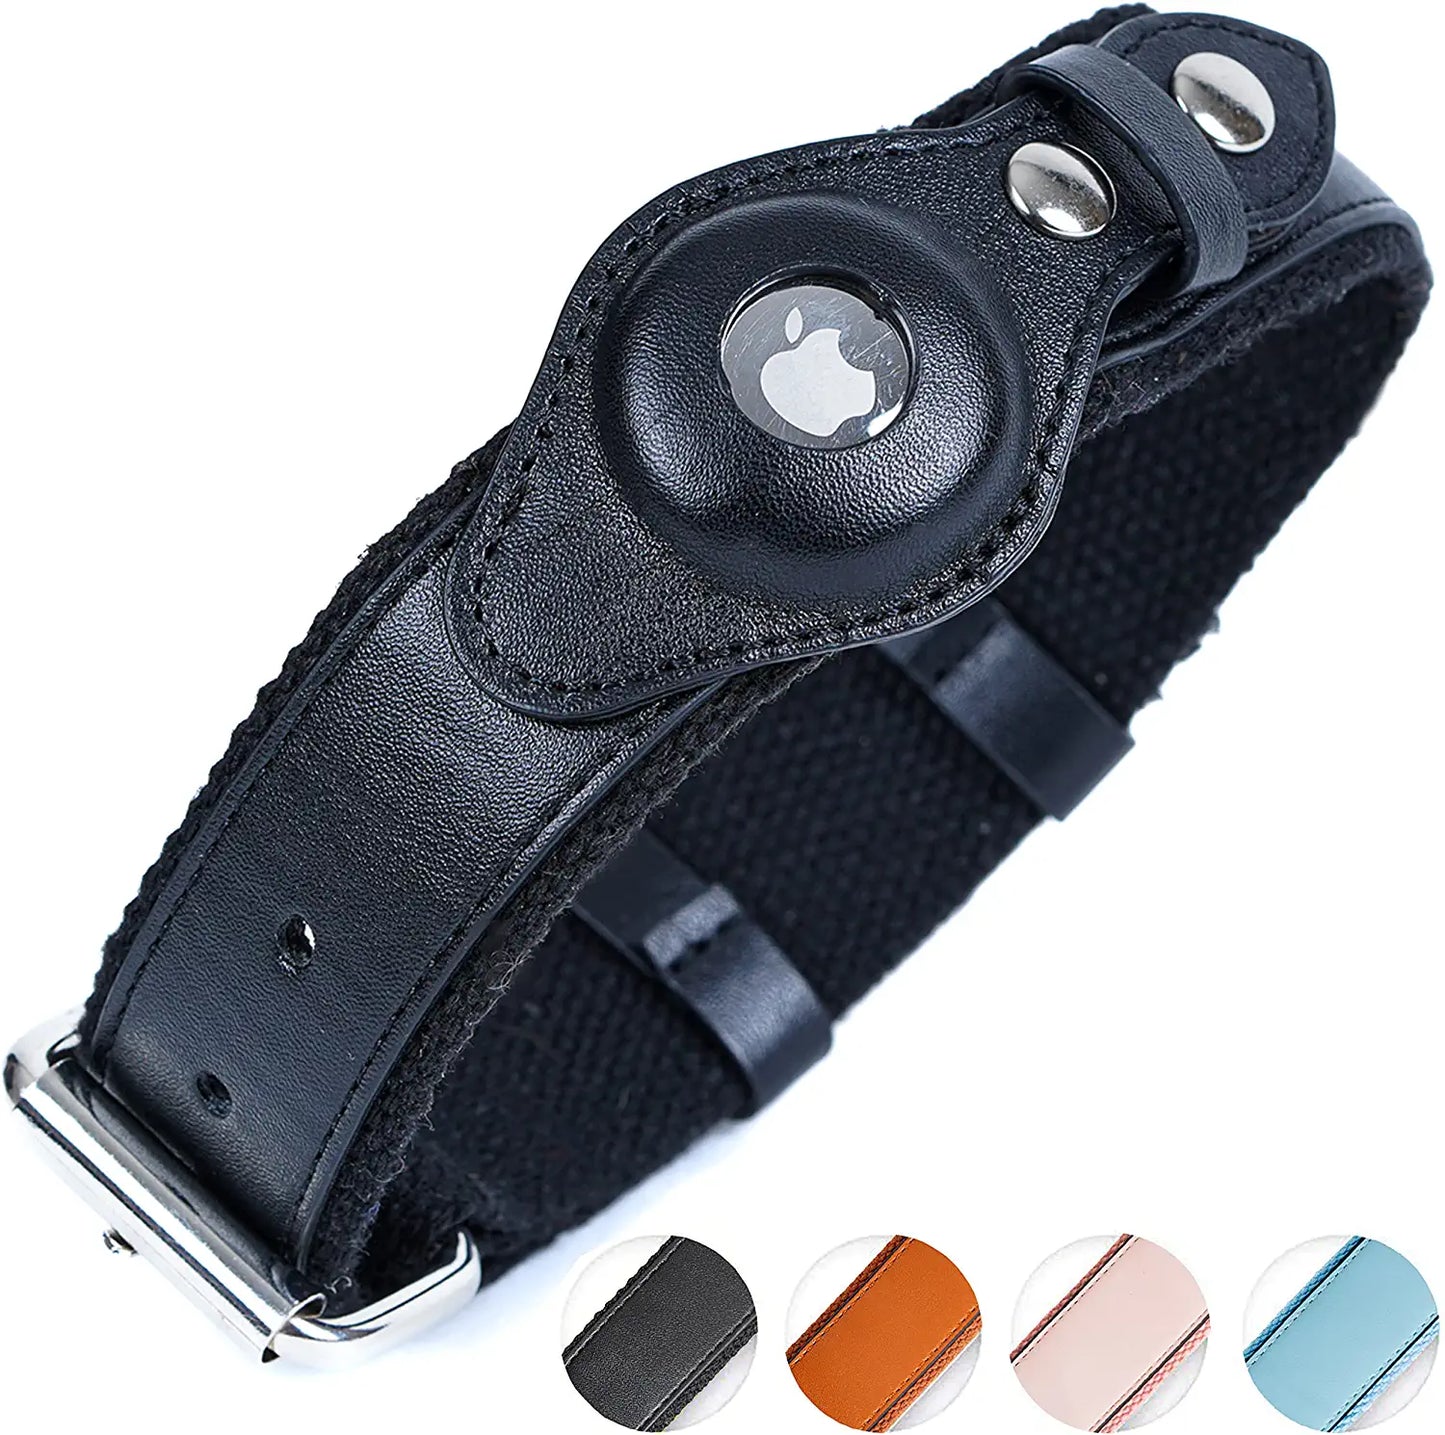 Safe Paws Airtag Dog Collar Holder - Our Adjustable Air Tag Dog Collar Holder Fits Small Medium and Large Dogs - Use Our Elegant PU Leather Dog Airtag Collar to Quickly Locate Your Dog Electronics > GPS Accessories > GPS Cases Safe Paws Black Large 